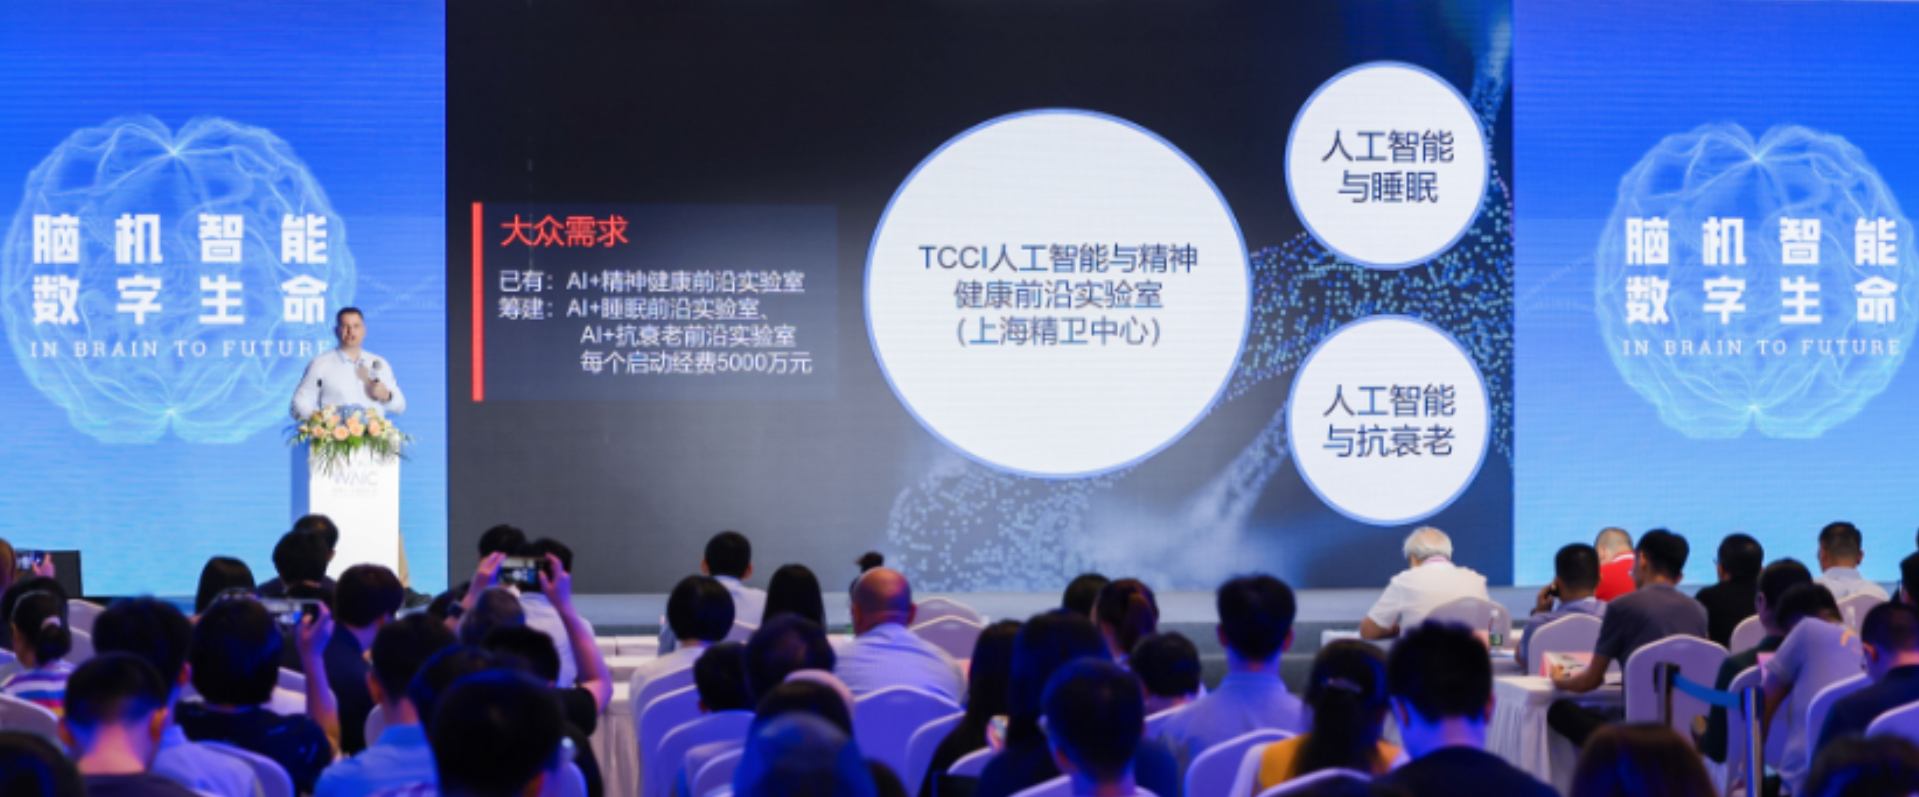 Now or Never: TCCI Founder Tianqiao Chen Announces One Billion Investment in AI + Brain Science